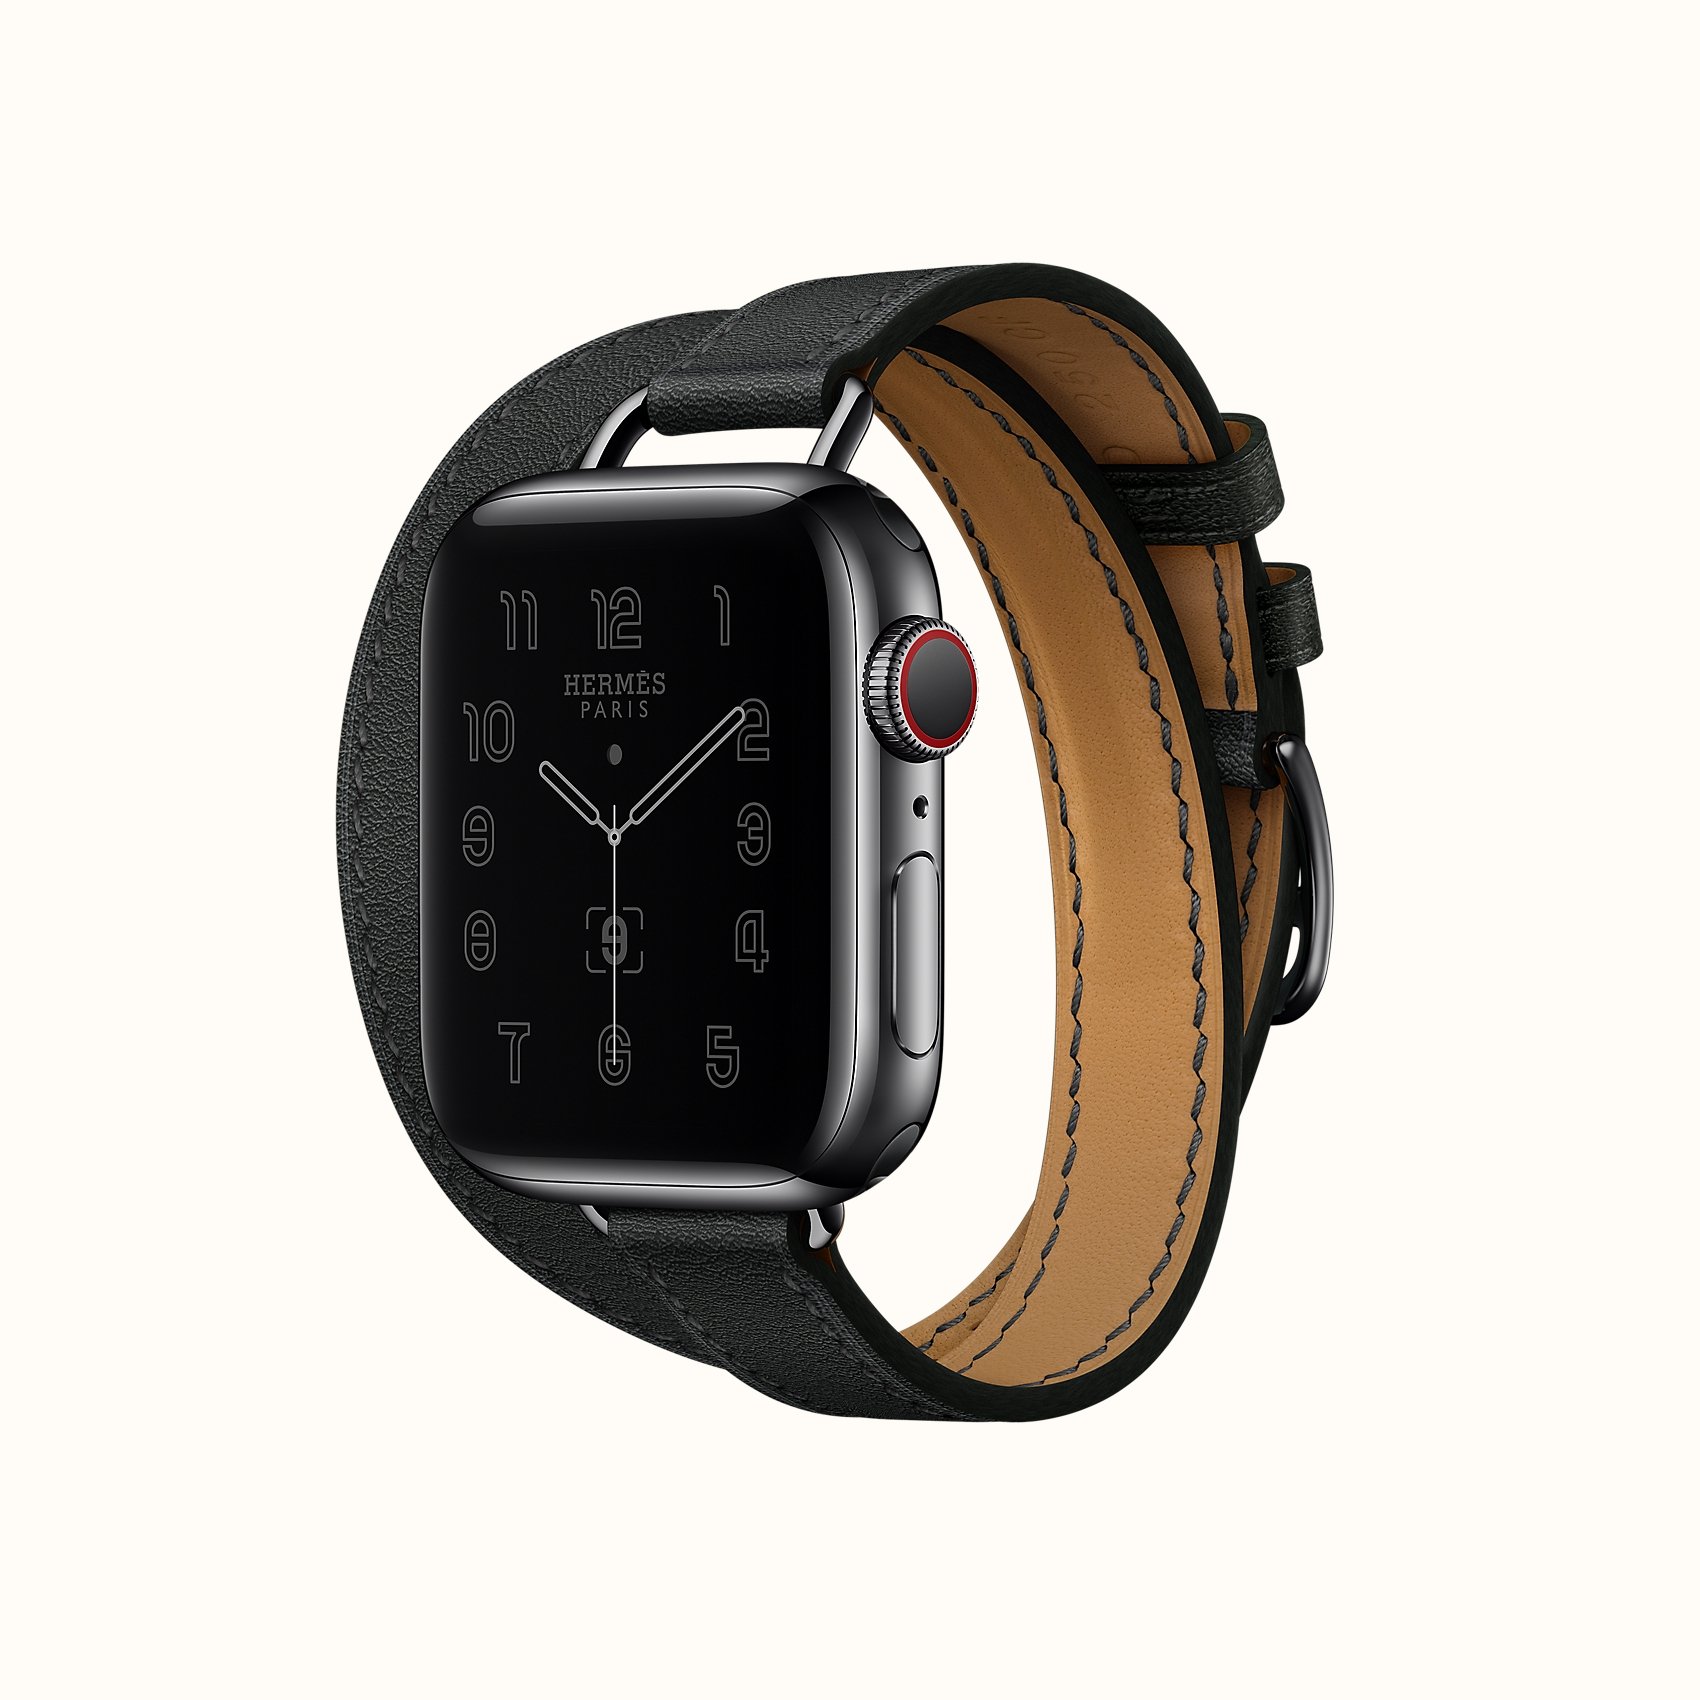 Space Black Series 6 case & Band Apple Watch Hermes Double Tour 40